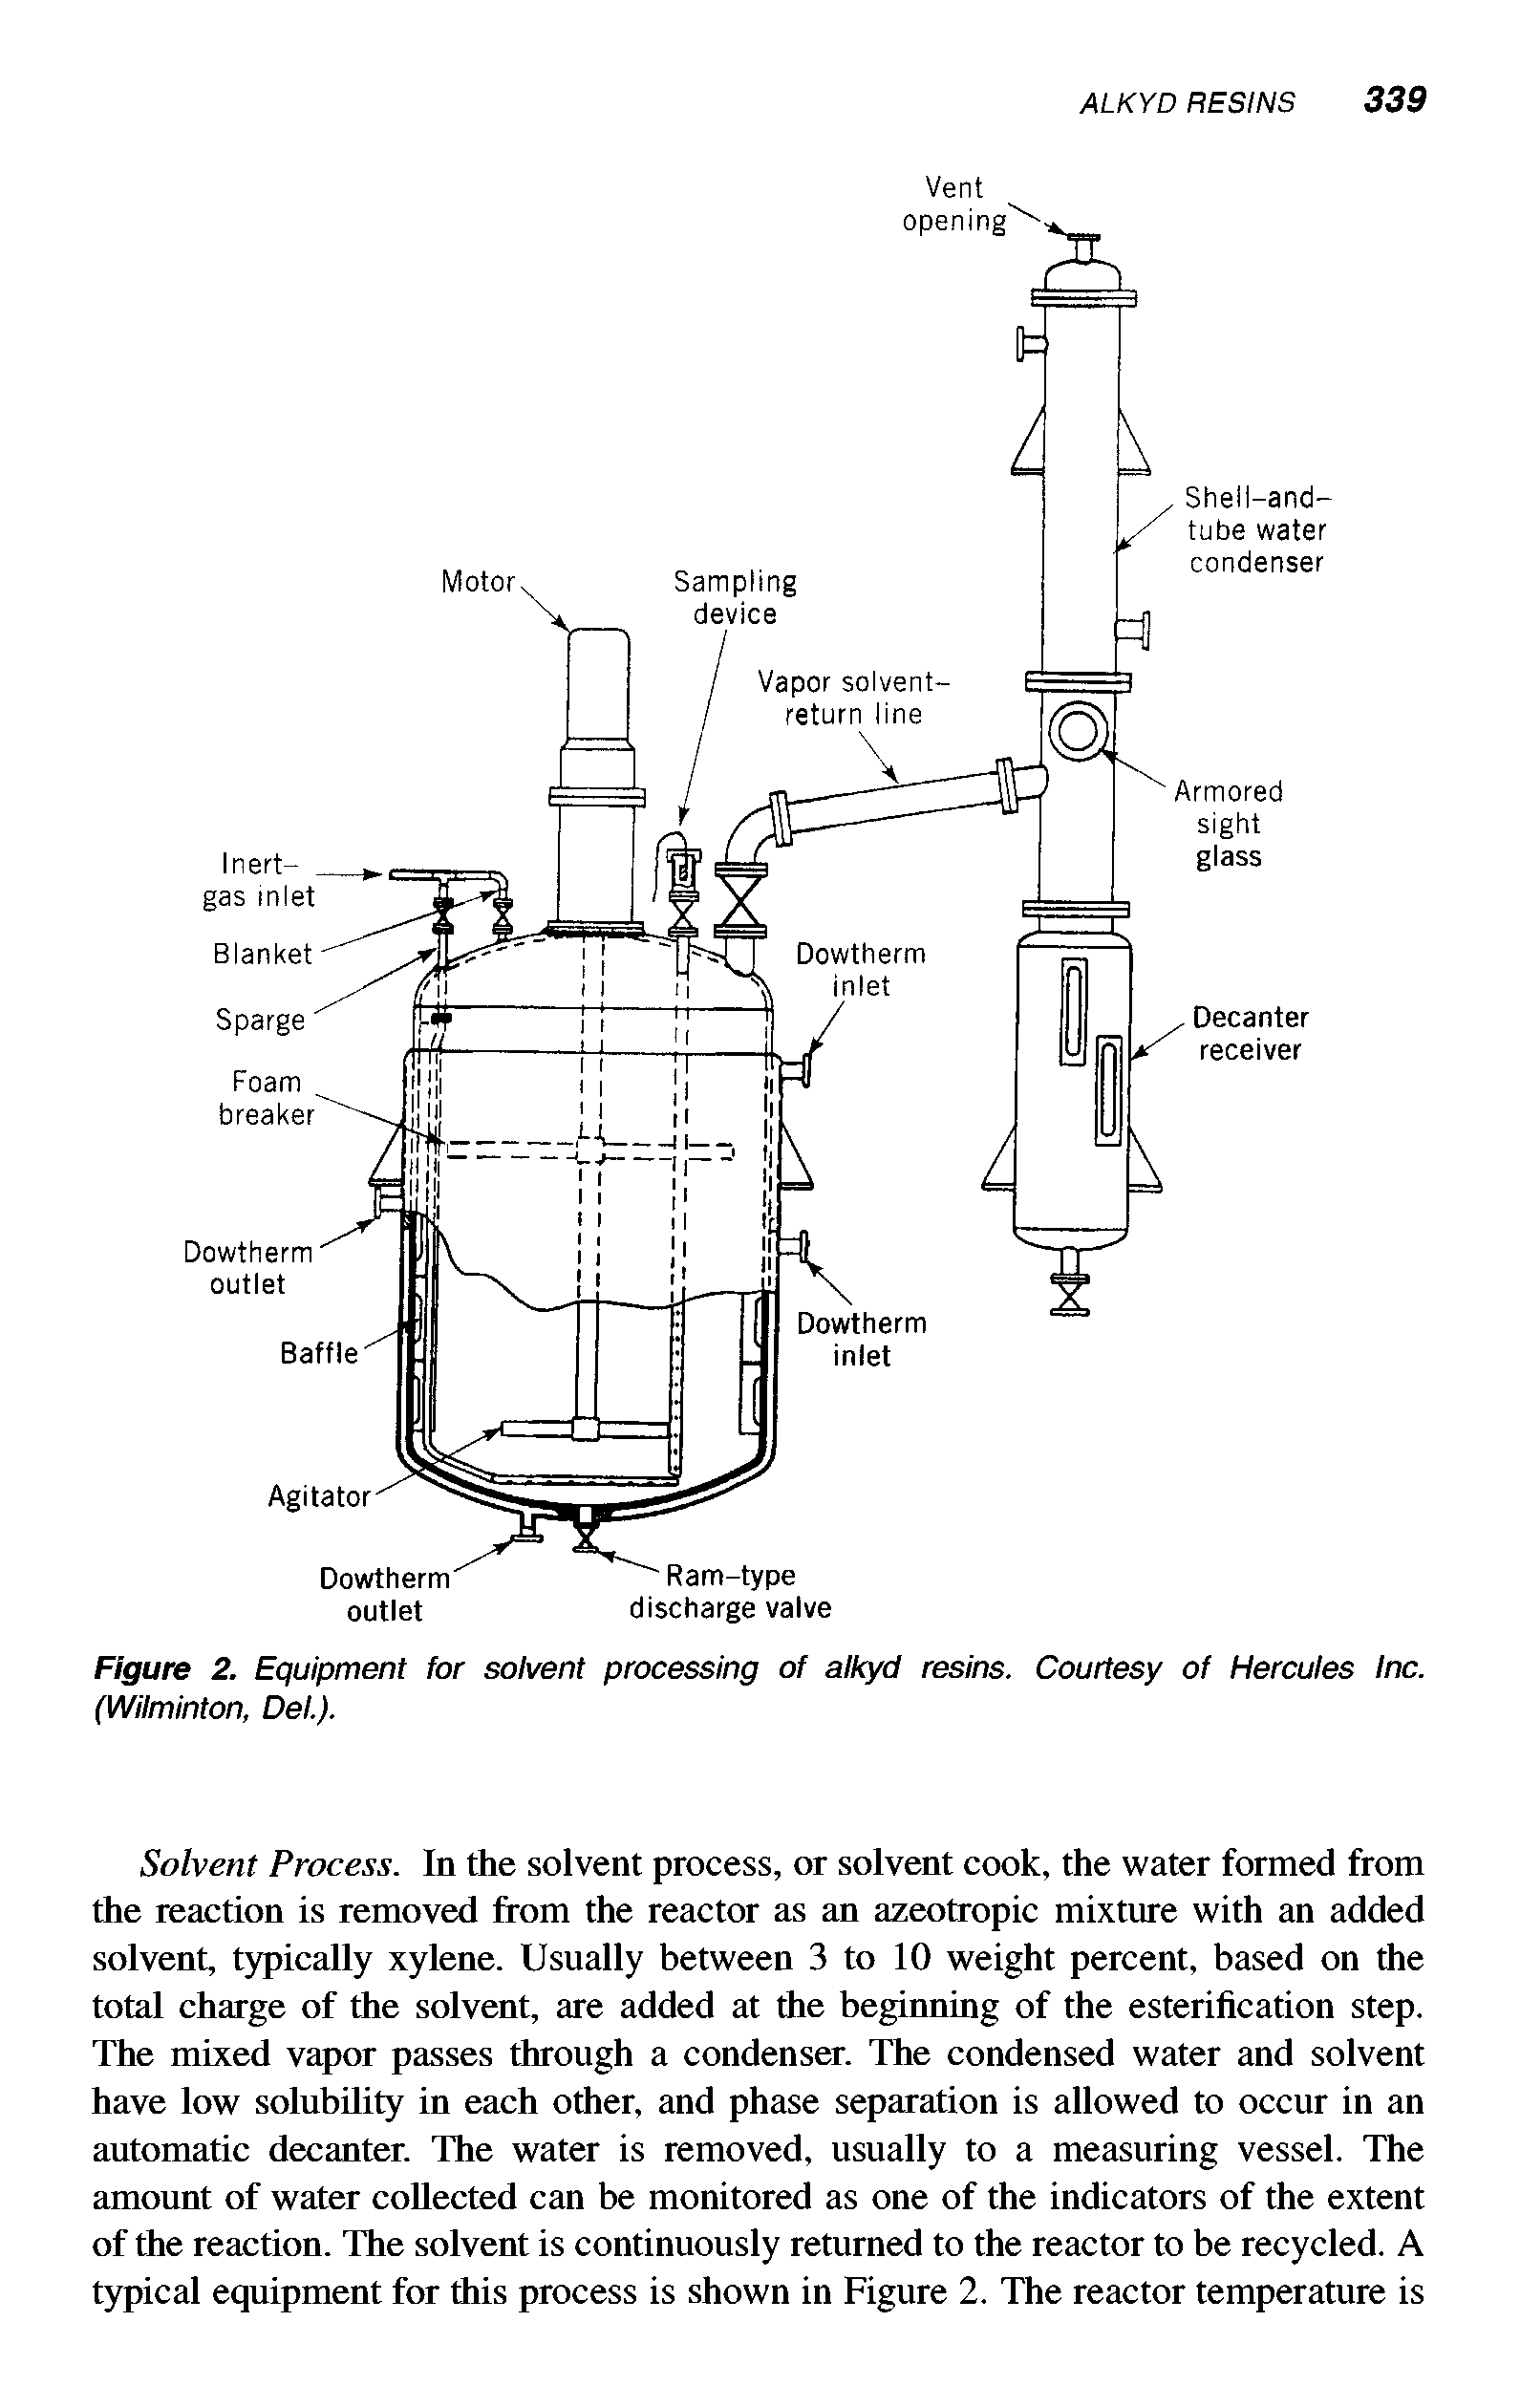 Figure 2. Equipment for solvent processing of alkyd resins. Courtesy of Hercules Inc. (Wilminton, Del.).